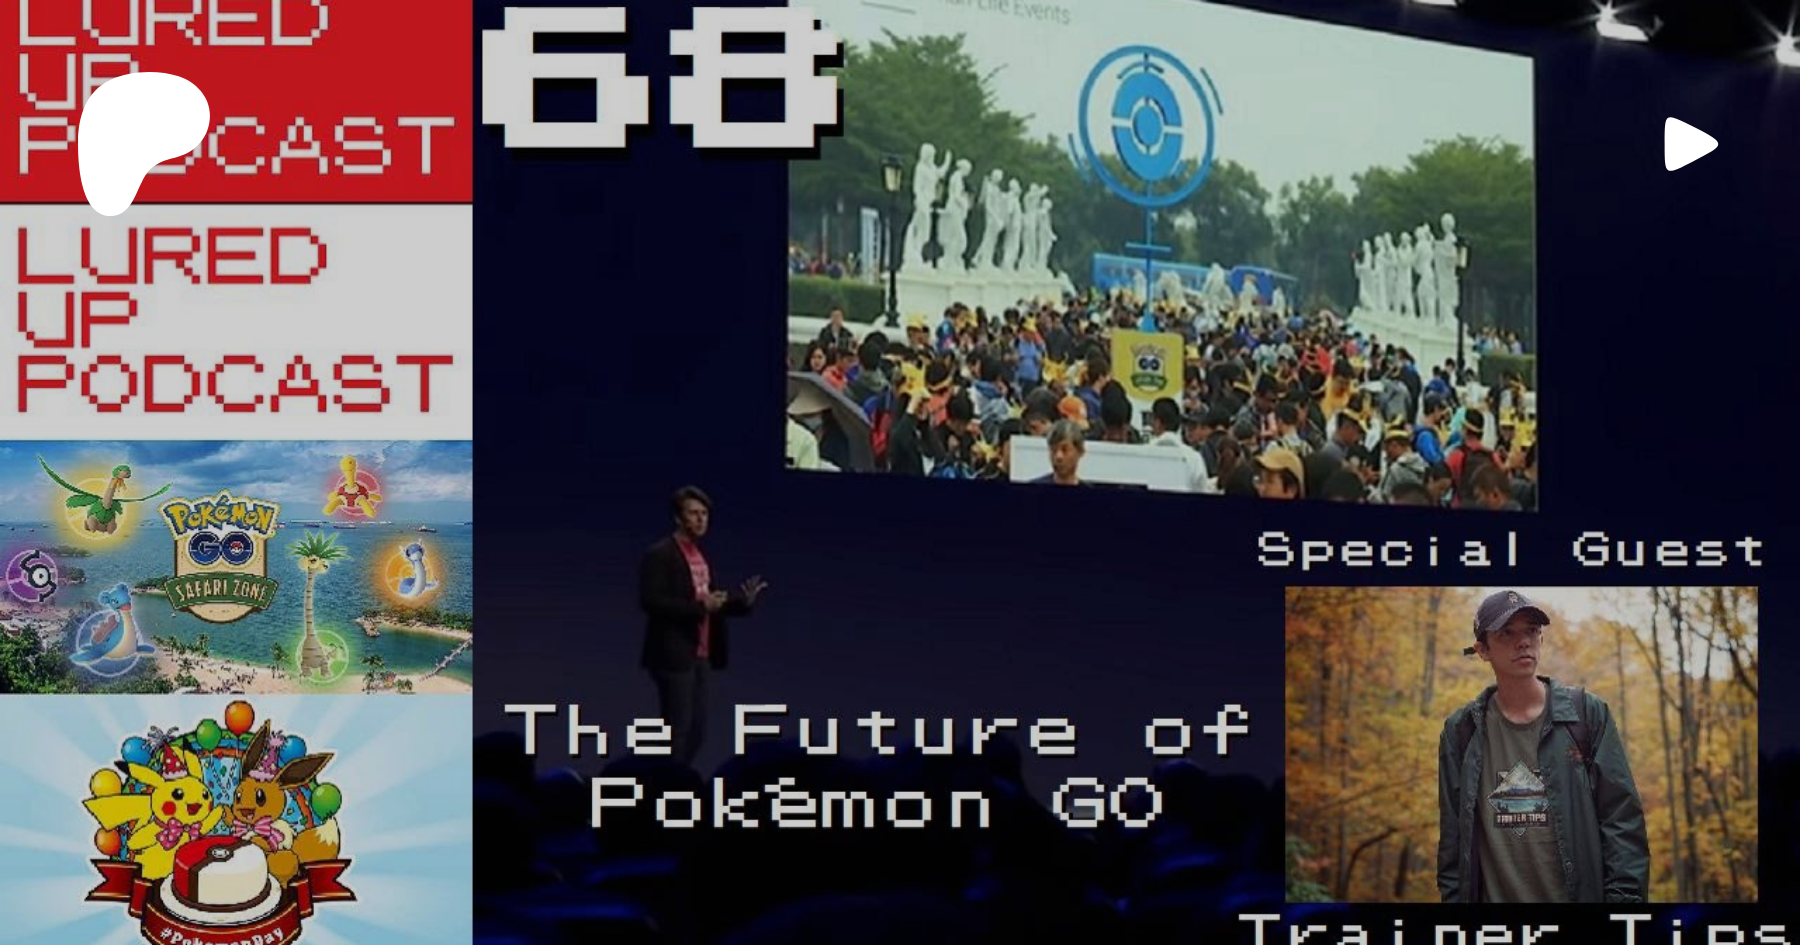 Lured Up Podcast 68 - The Future of Pokémon GO with TRAINER TIPS